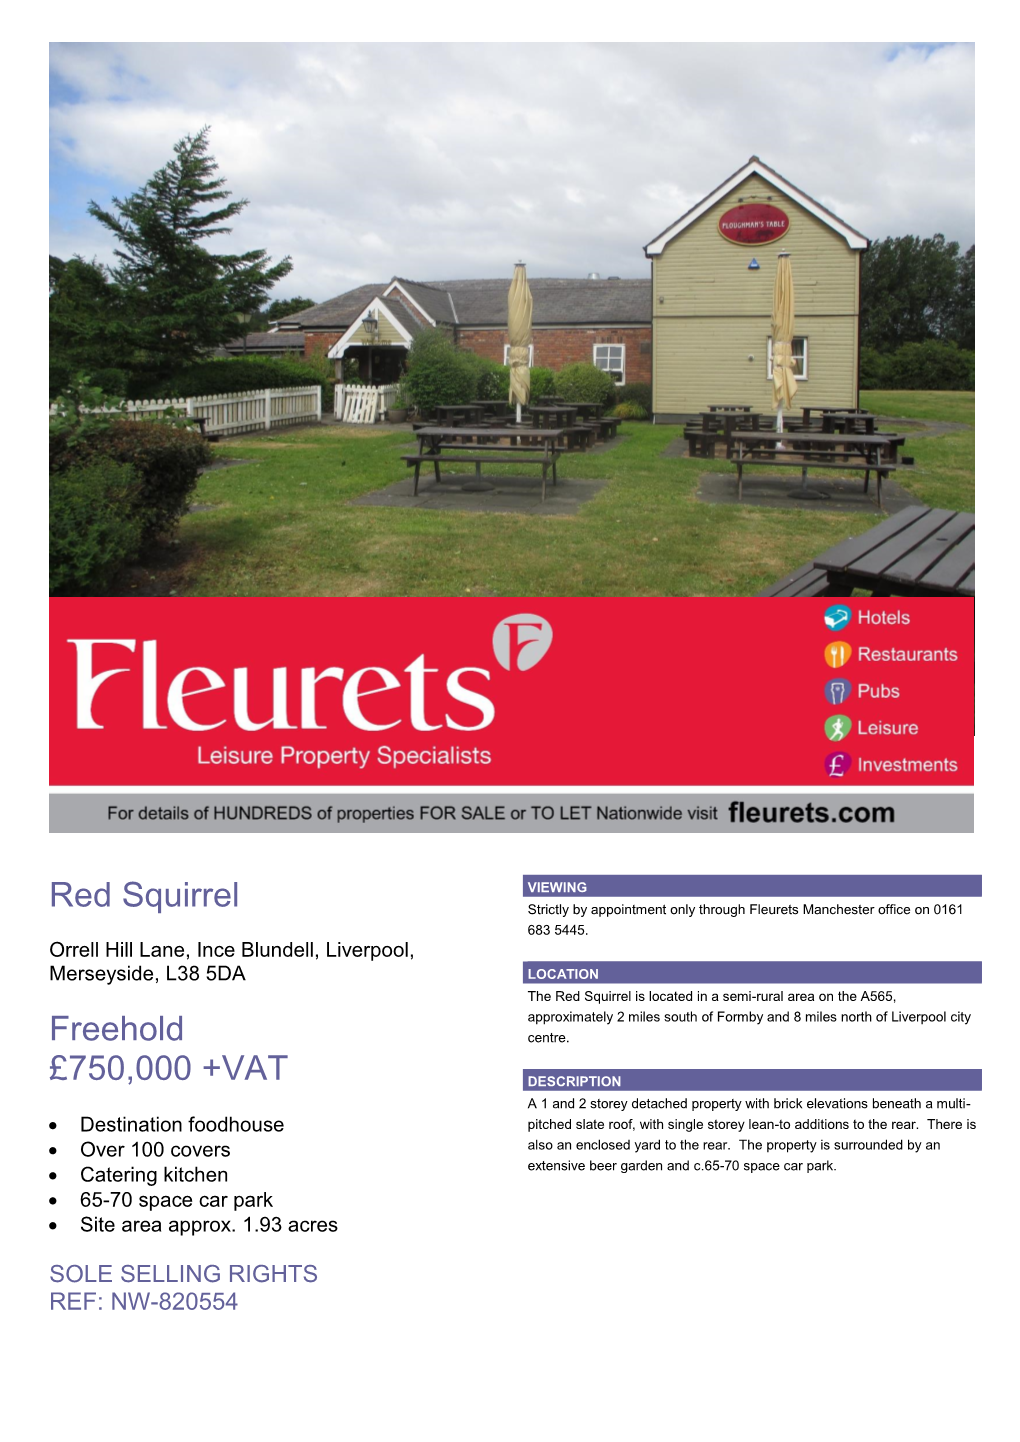 Red Squirrel Strictly by Appointment Only Through Fleurets Manchester Office on 0161 683 5445